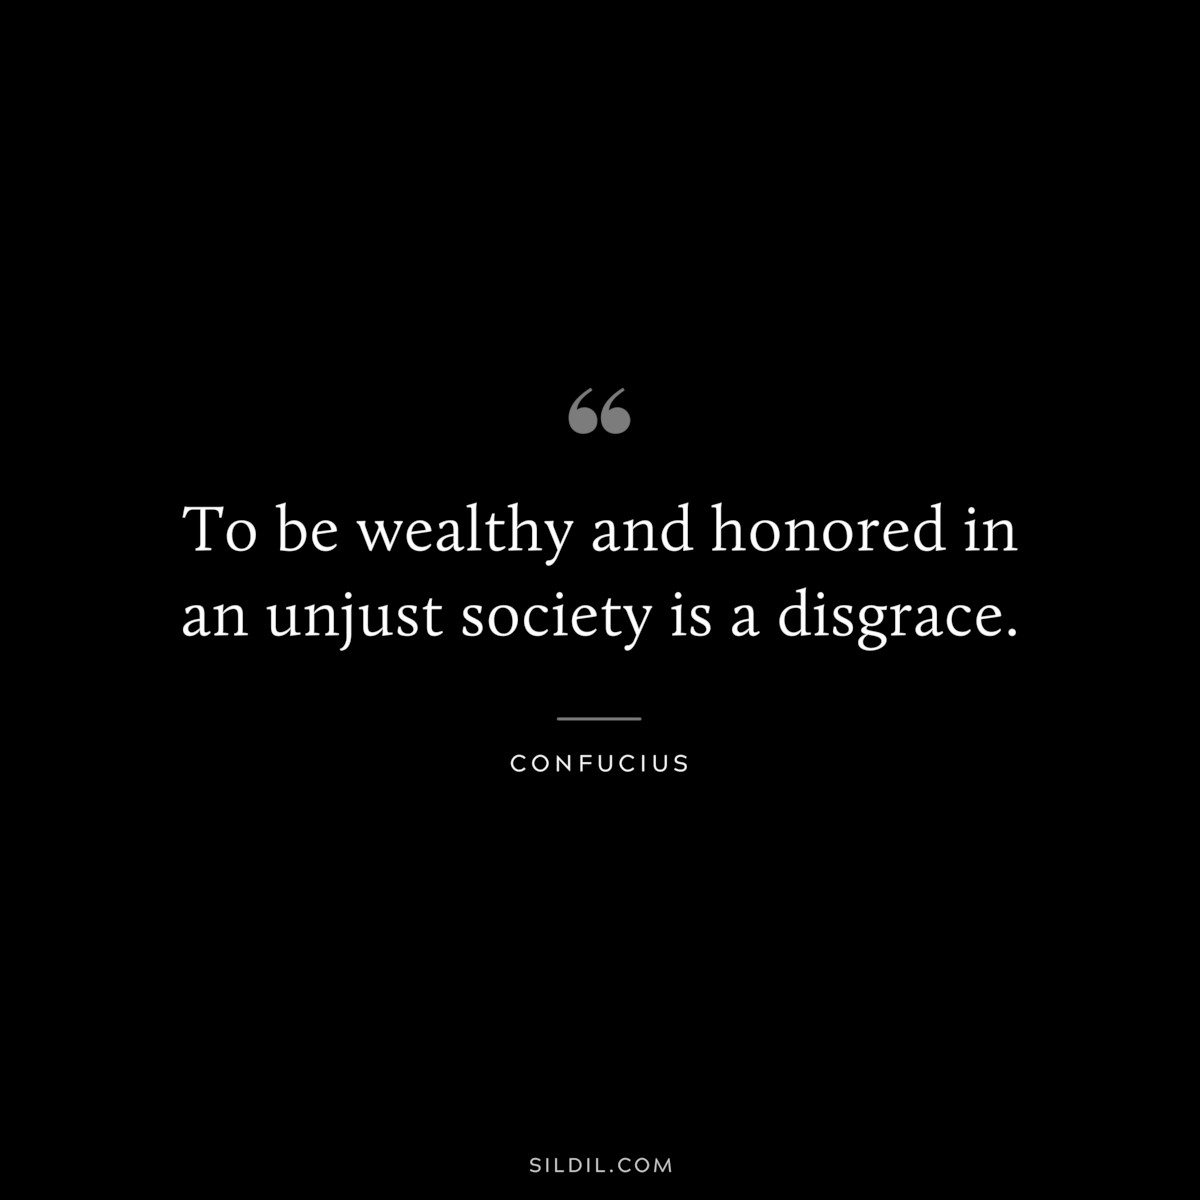 To be wealthy and honored in an unjust society is a disgrace. ― Confucius